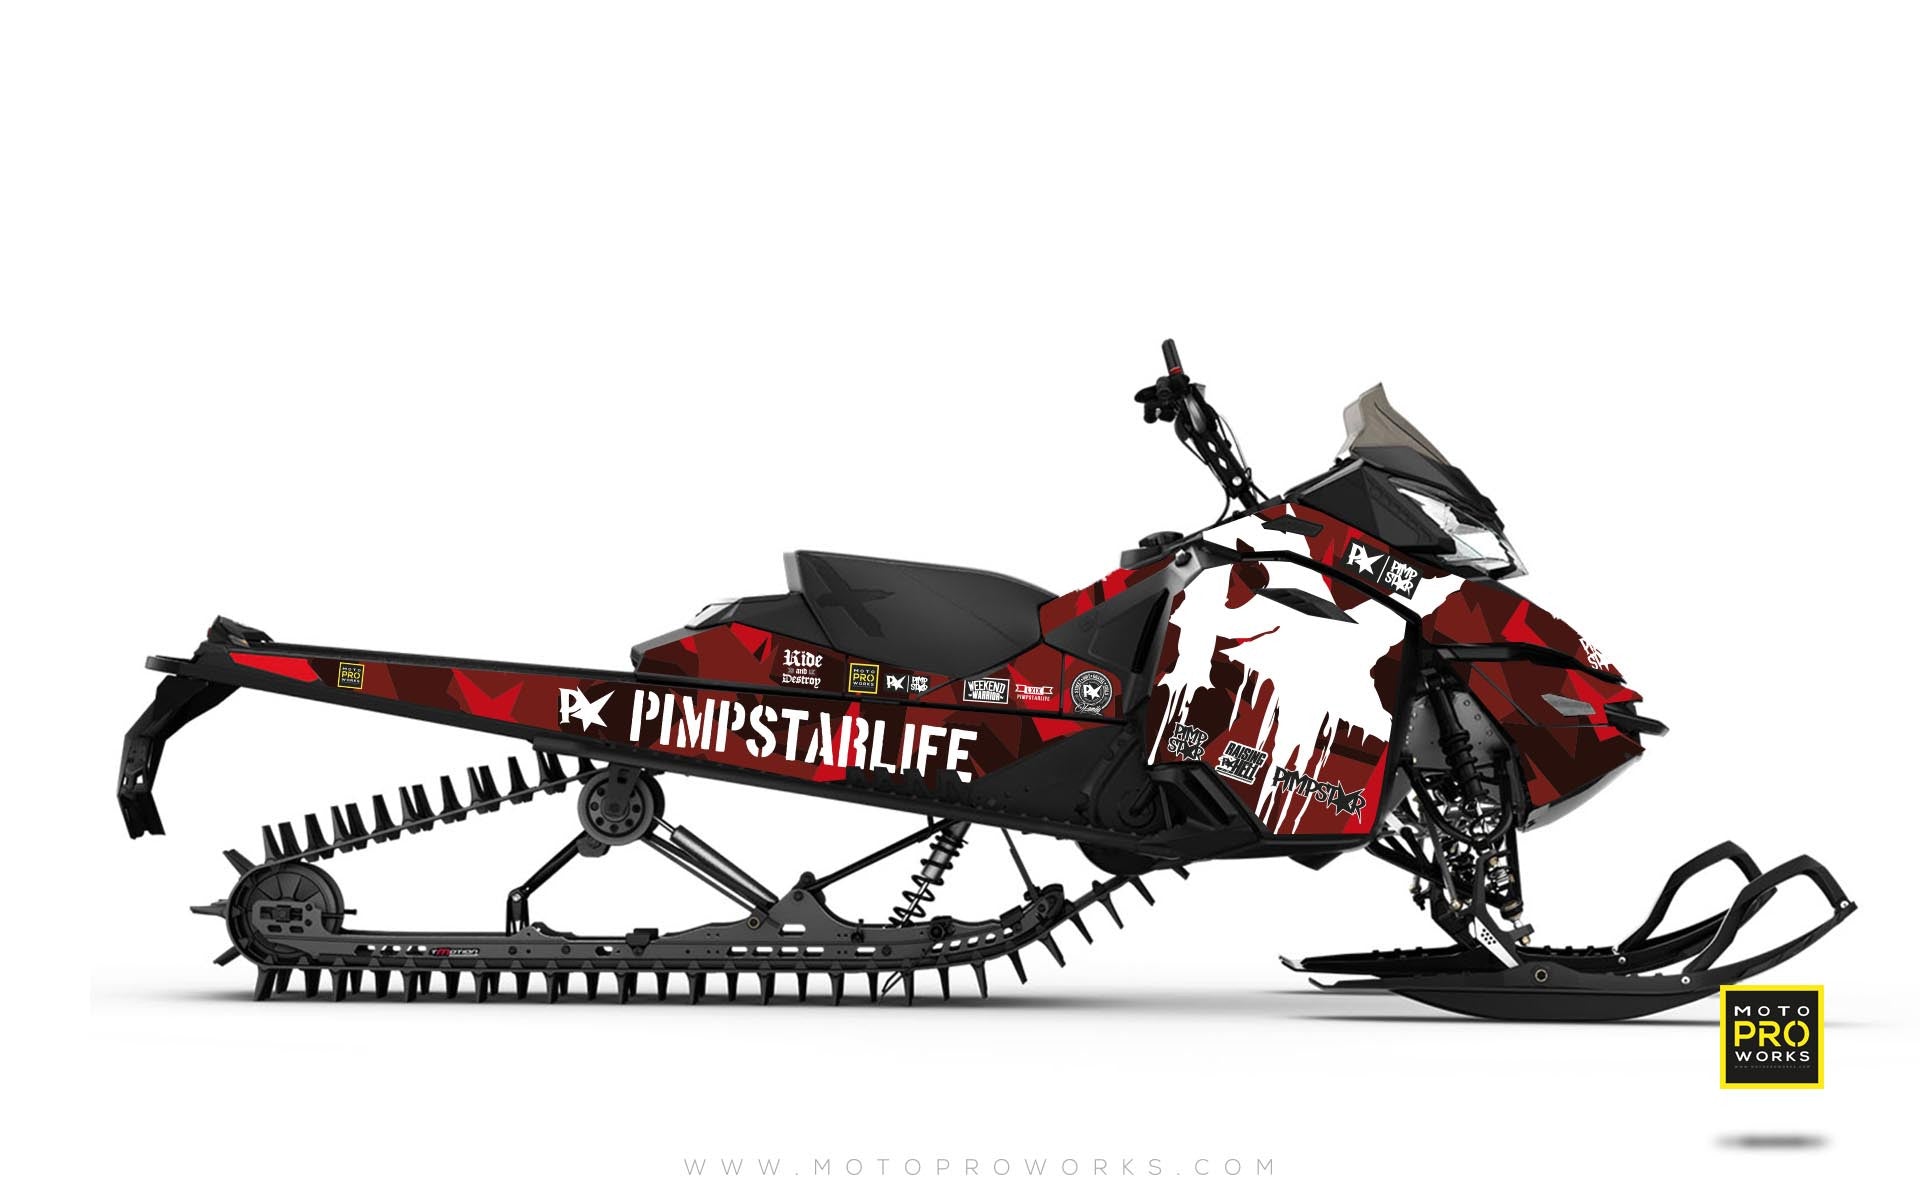 Ski-Doo Graphics - "M90" (red) - MotoProWorks | Decals and Bike Graphic kit